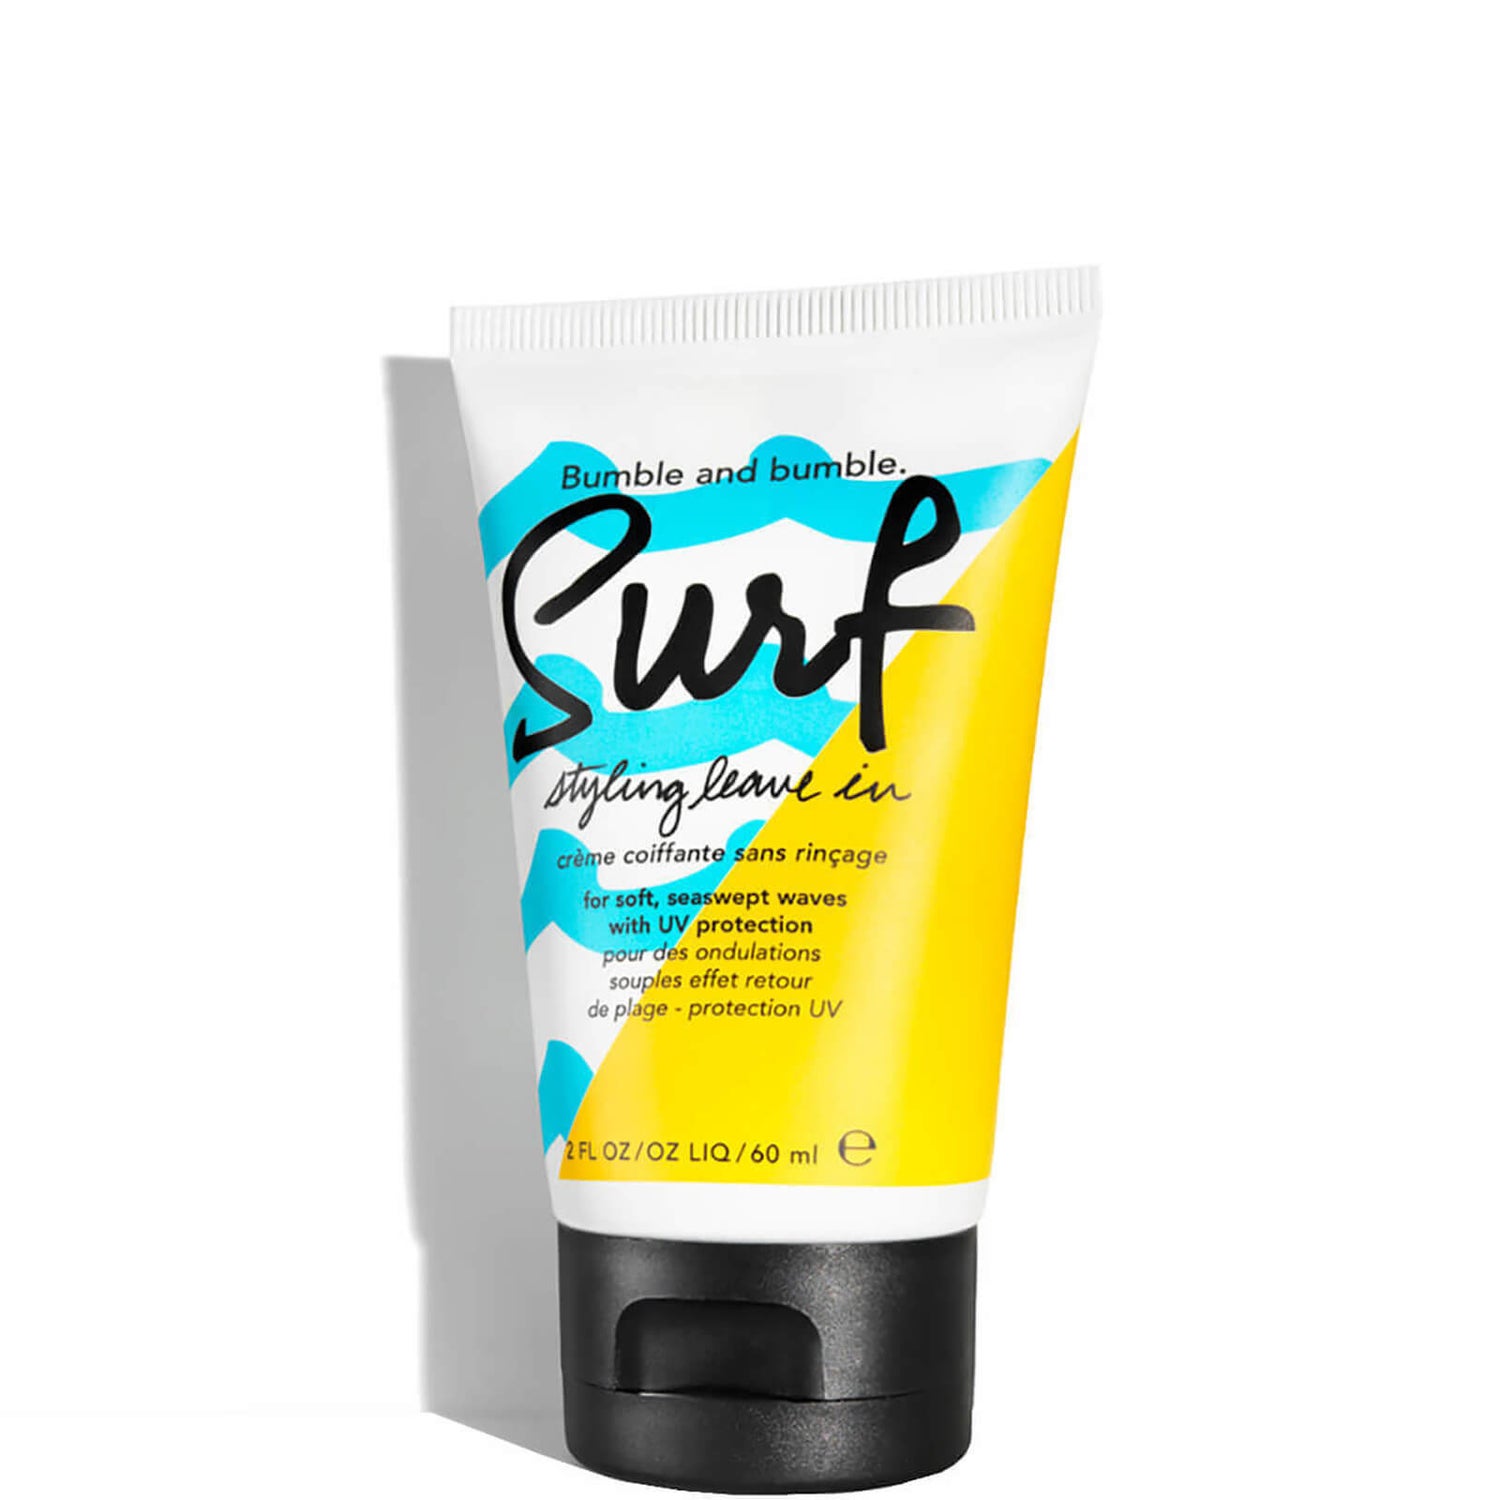 Crema Styiling Leave in Bumble and bumble Surf 60ml